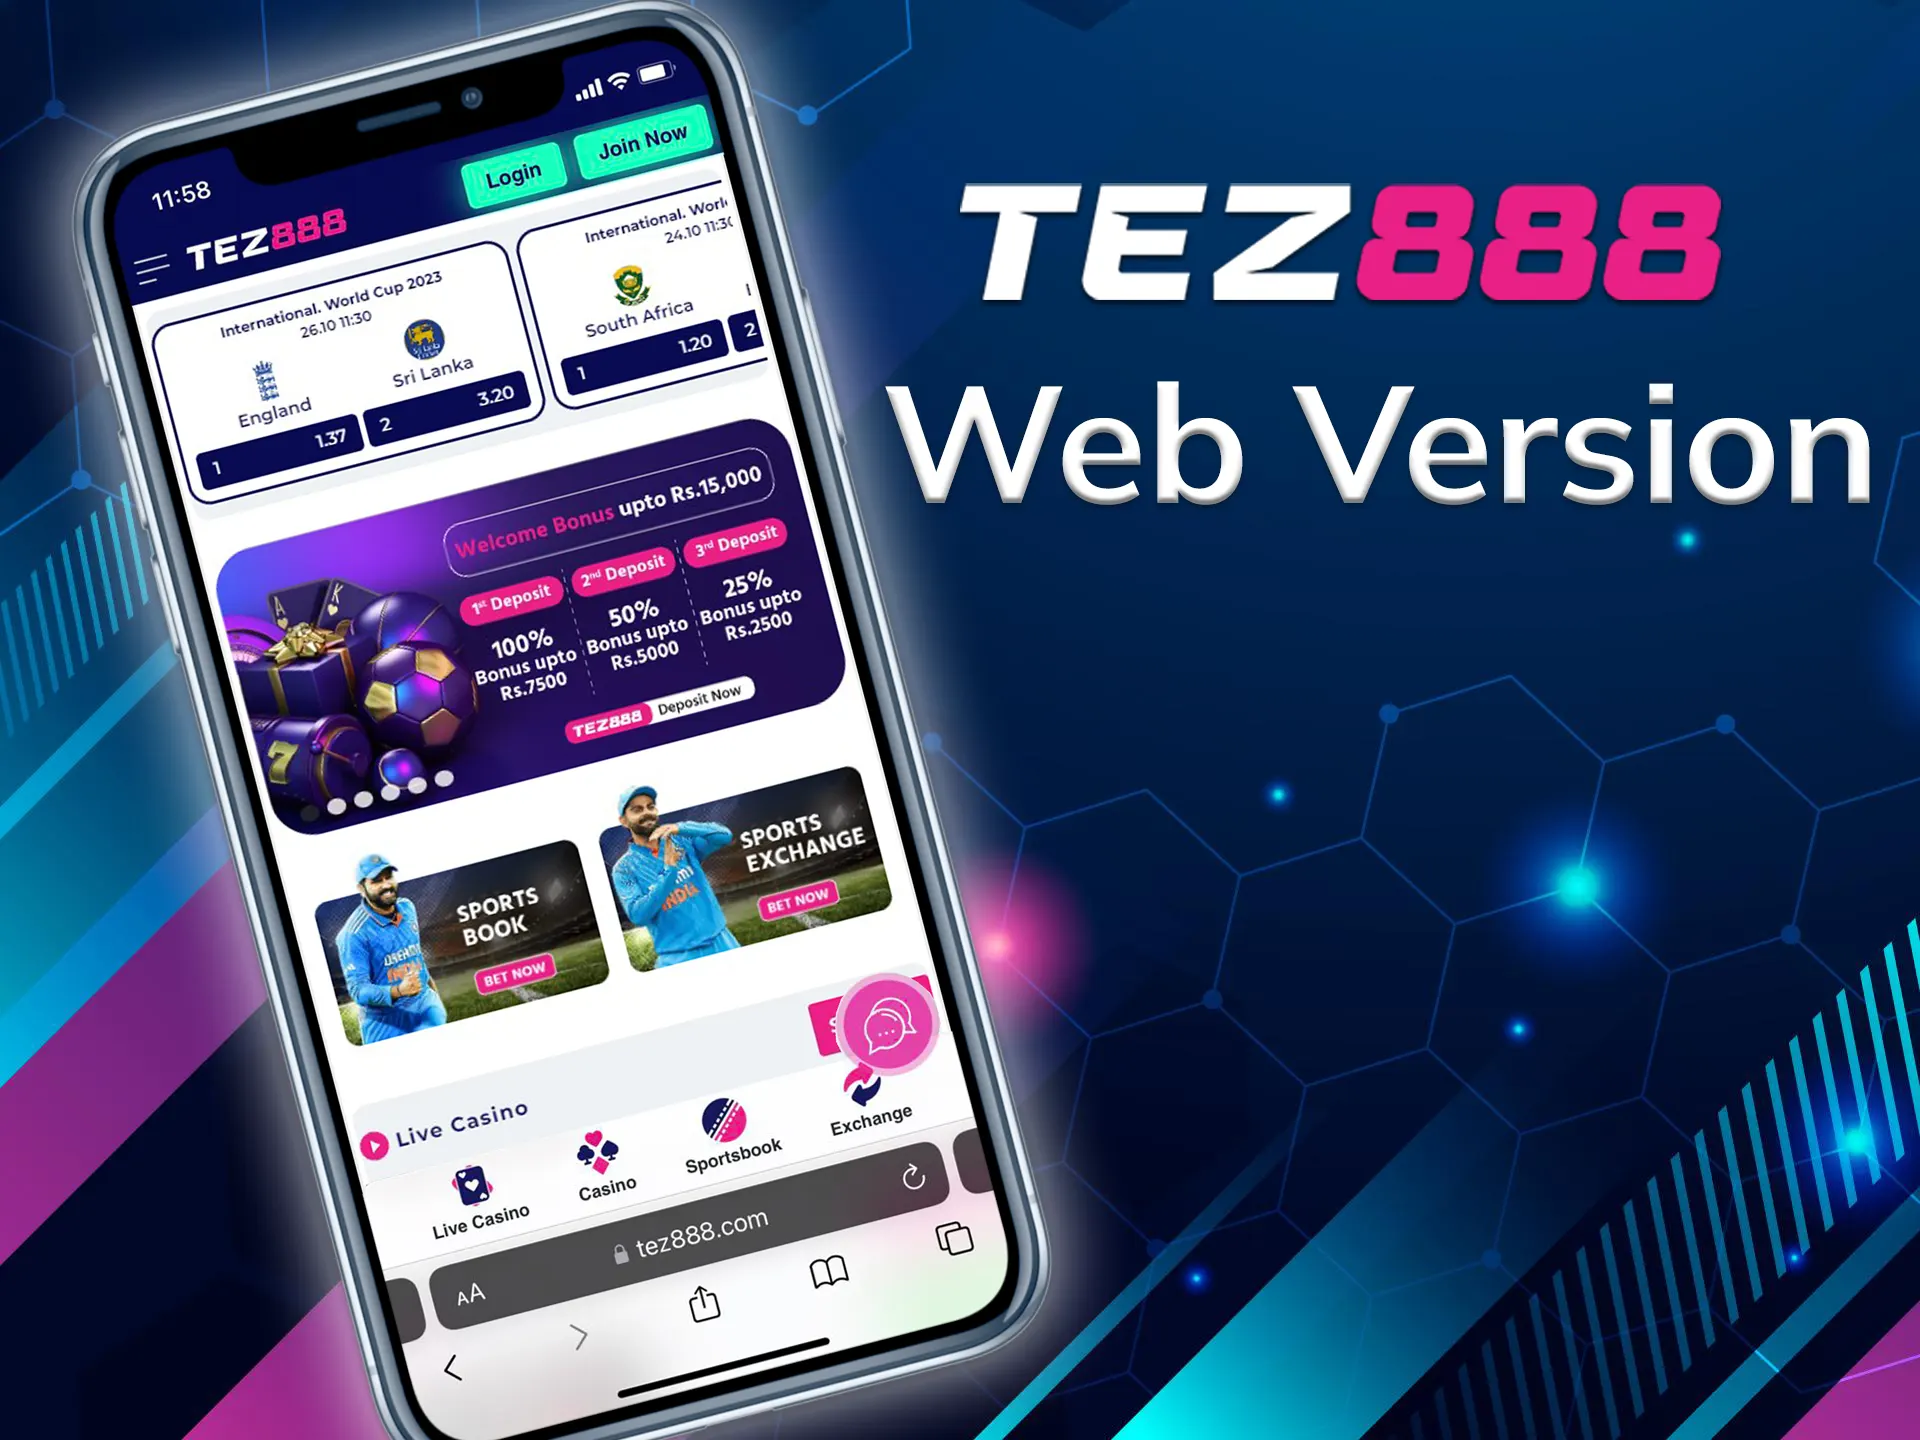 The mobile version of the Tez888 website is provided with the same functionality as the app.